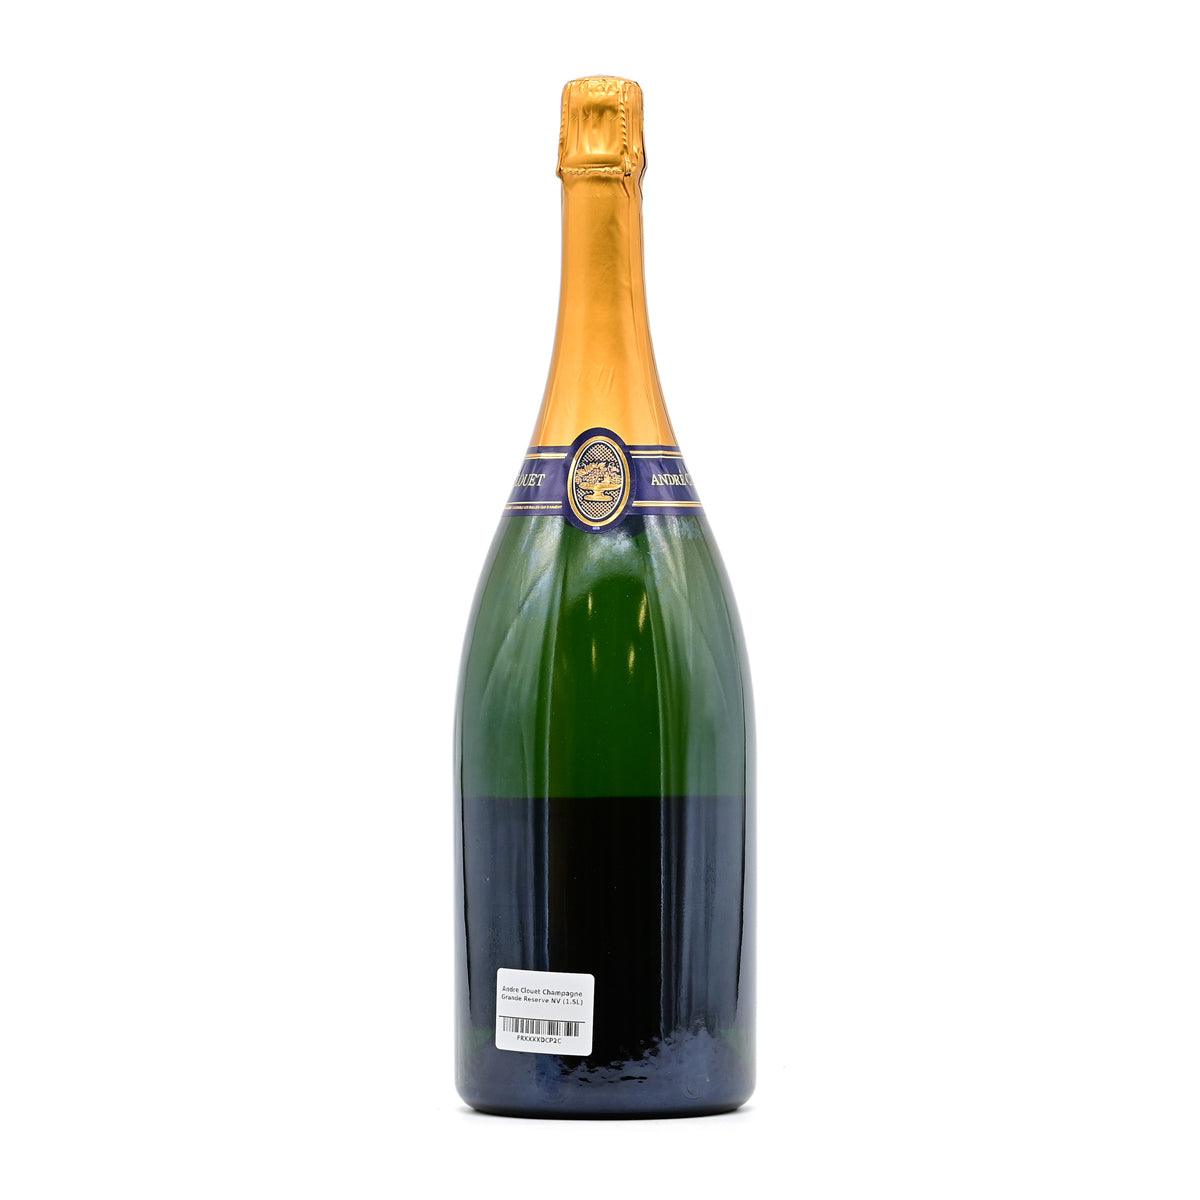 Andre Clouet Champagne Grande Reserve NV (1.5L) - Champagne - GDV Fine Wines® - 1500ml, AG90, Bouzy, Champagne, Champagne Andre Clouet, France, JS93, Non-Vintage, WA91, Wine Product